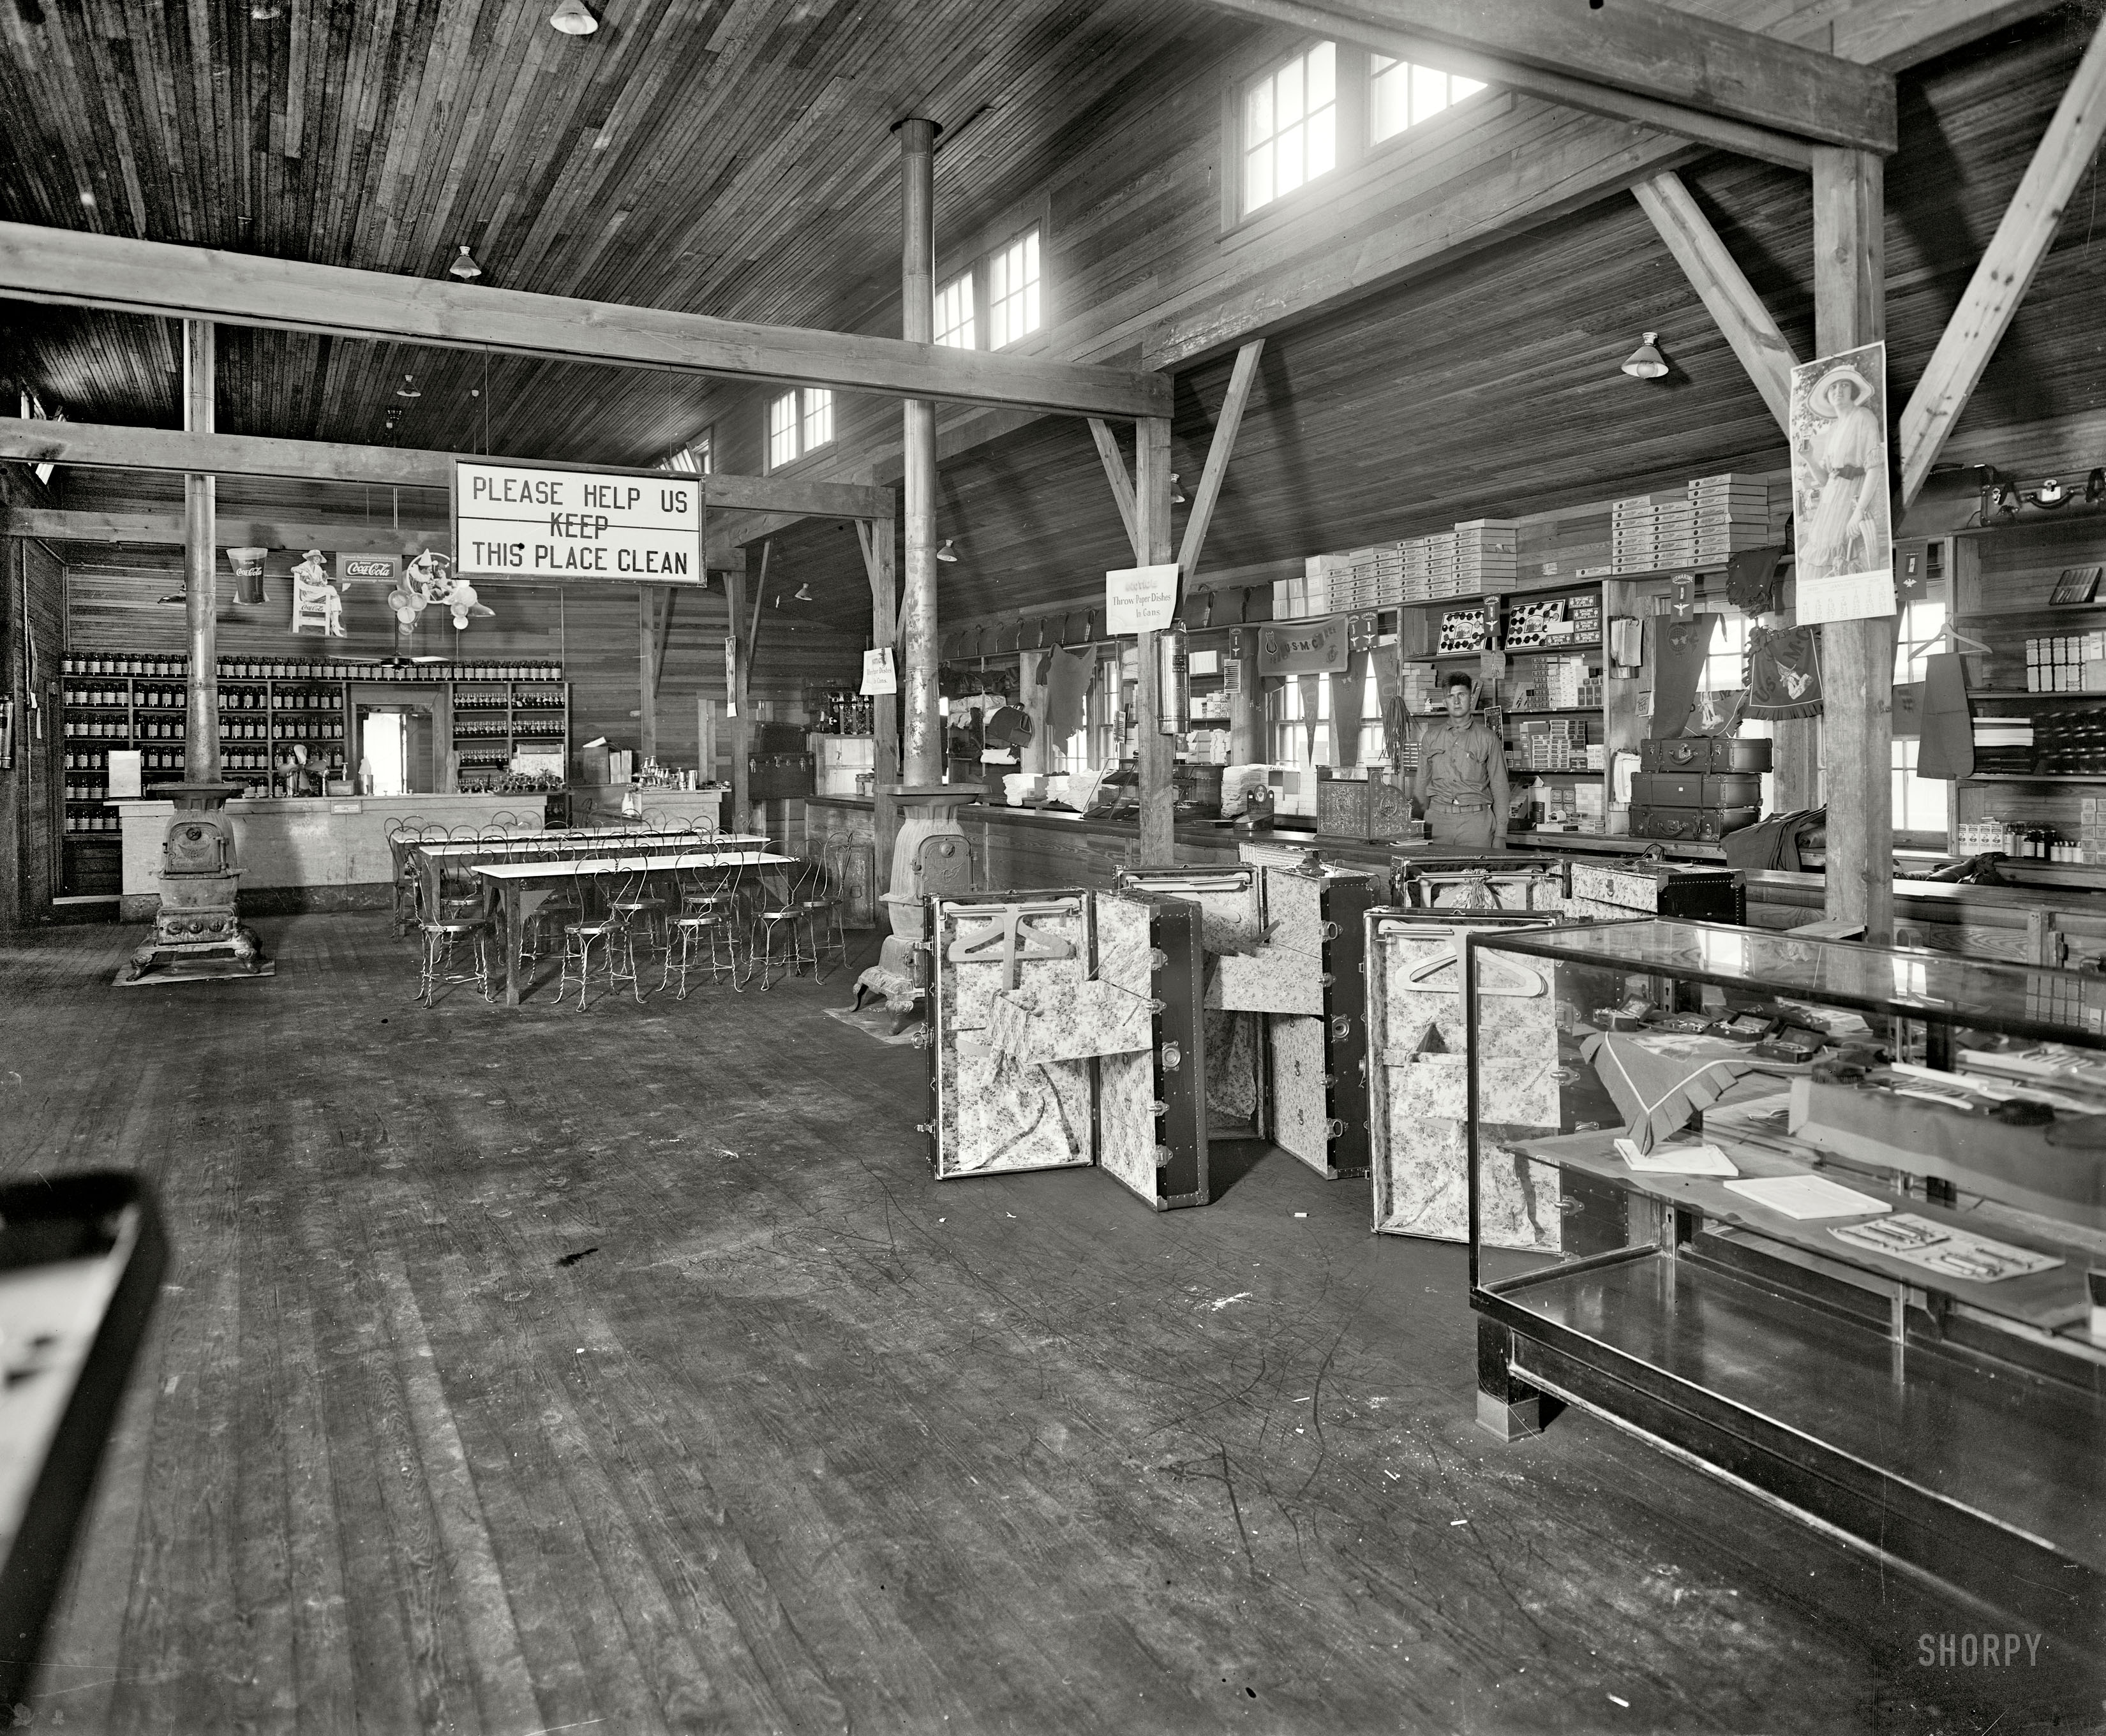 Quantico, Virginia, 1920. "Quantico Post Exchange." With merchandise ranging from tennis balls to steamer trunks. Harris & Ewing photo. View full size.